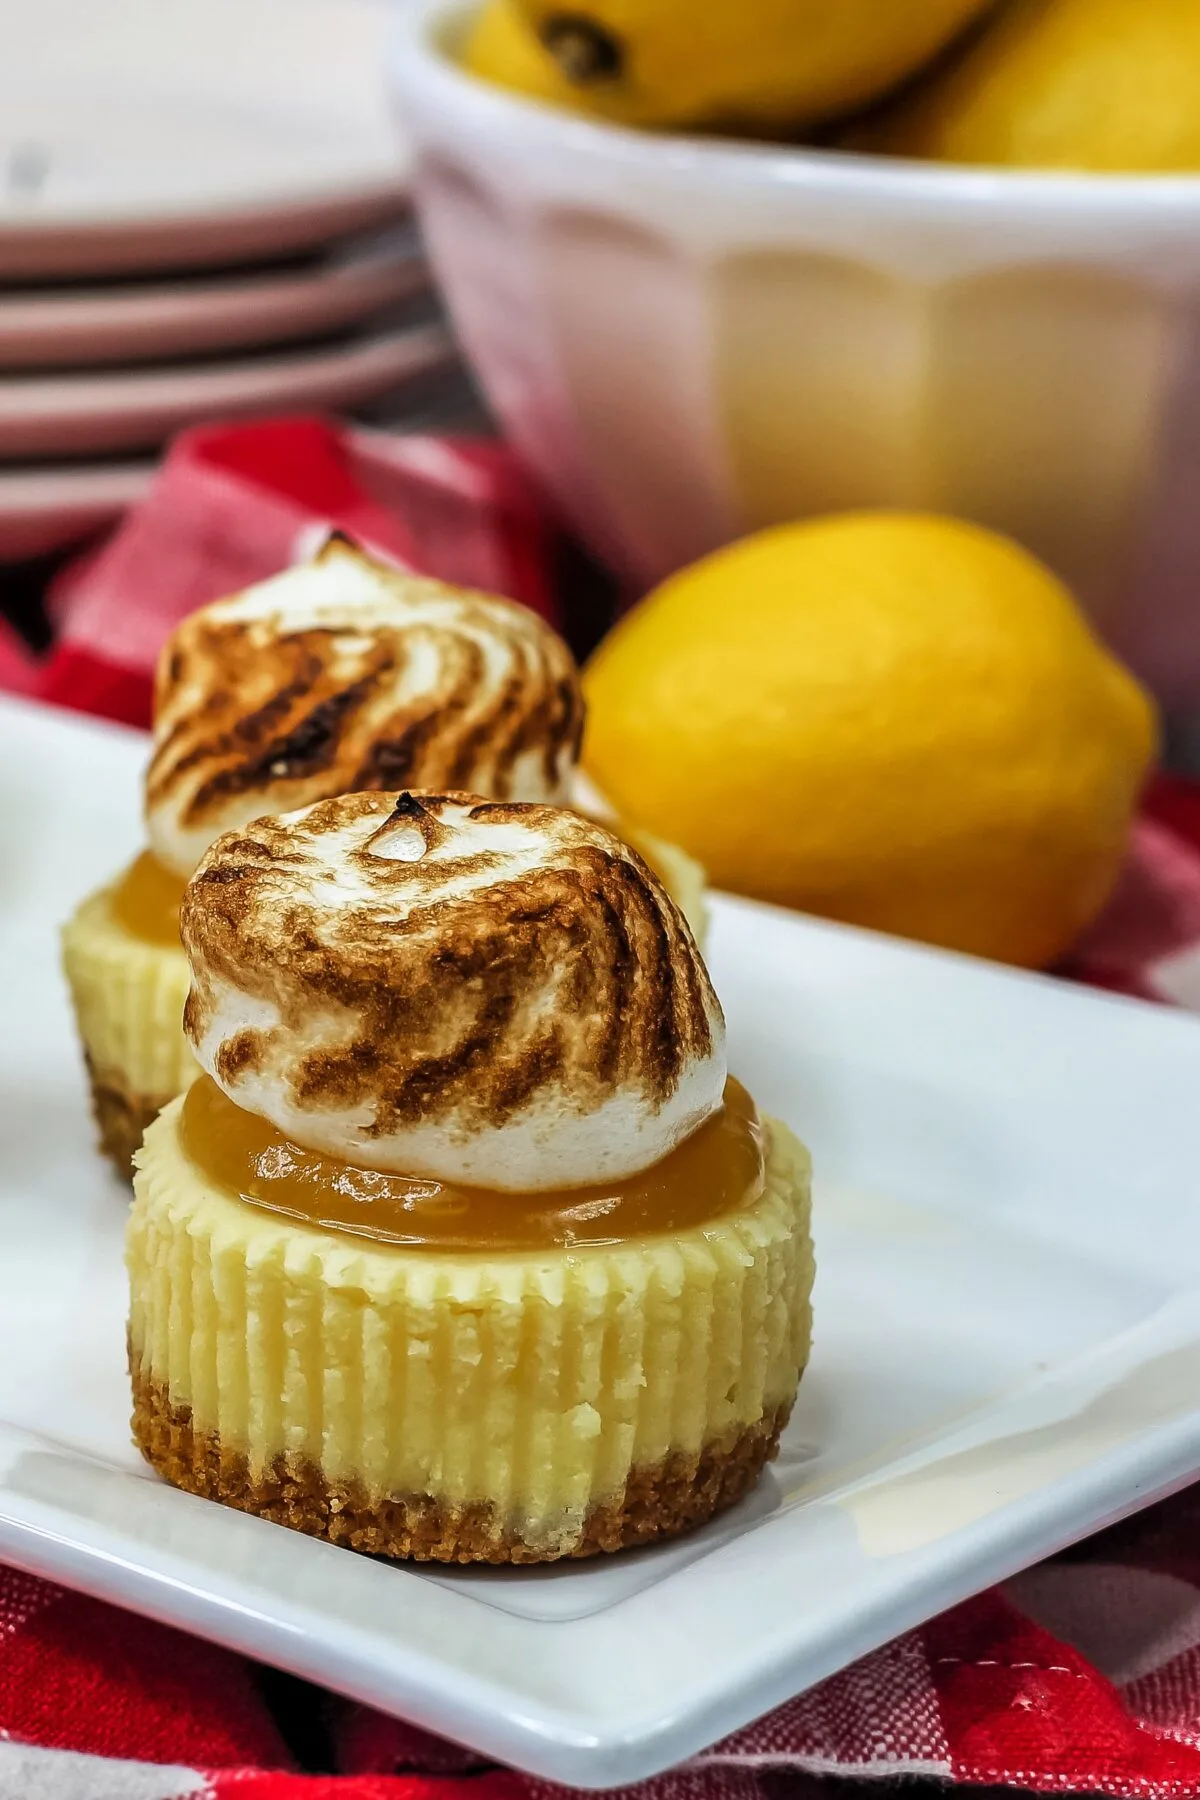 These mini lemon meringue cheesecakes are small, but they pack a tangy punch. A delicious and easy to make dessert for any occasion.